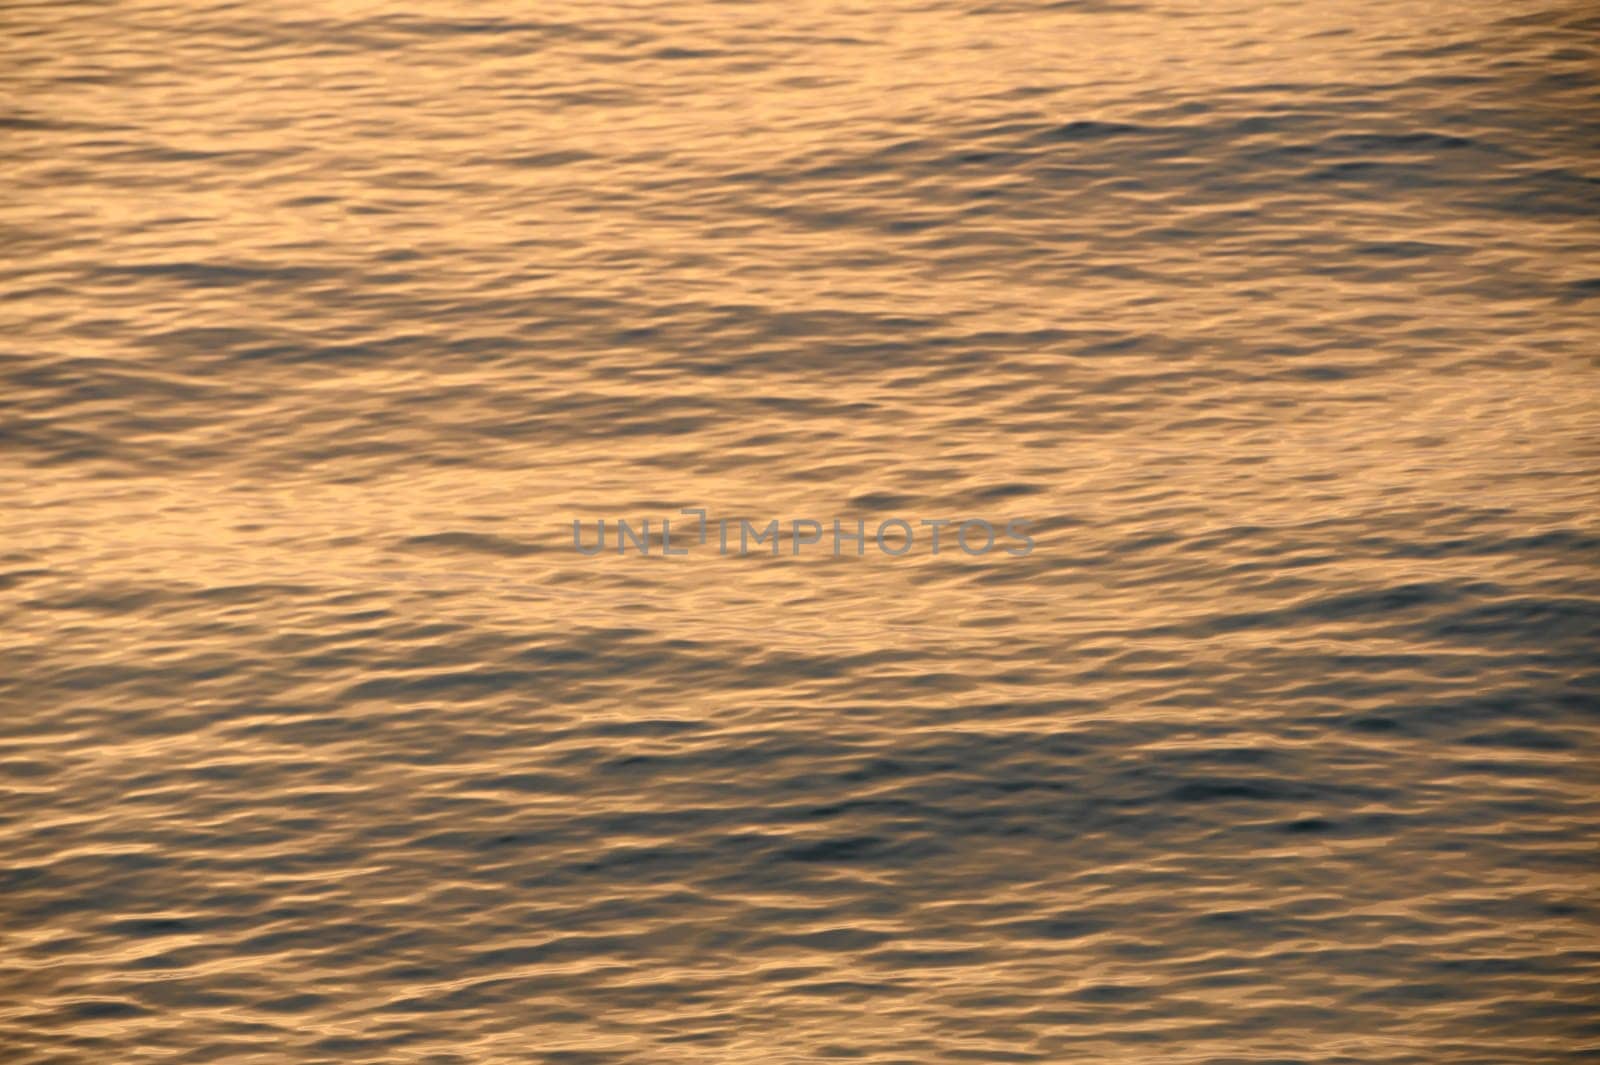 beautiful sunset of the Mediterranean sea, waves of golden color at sunset